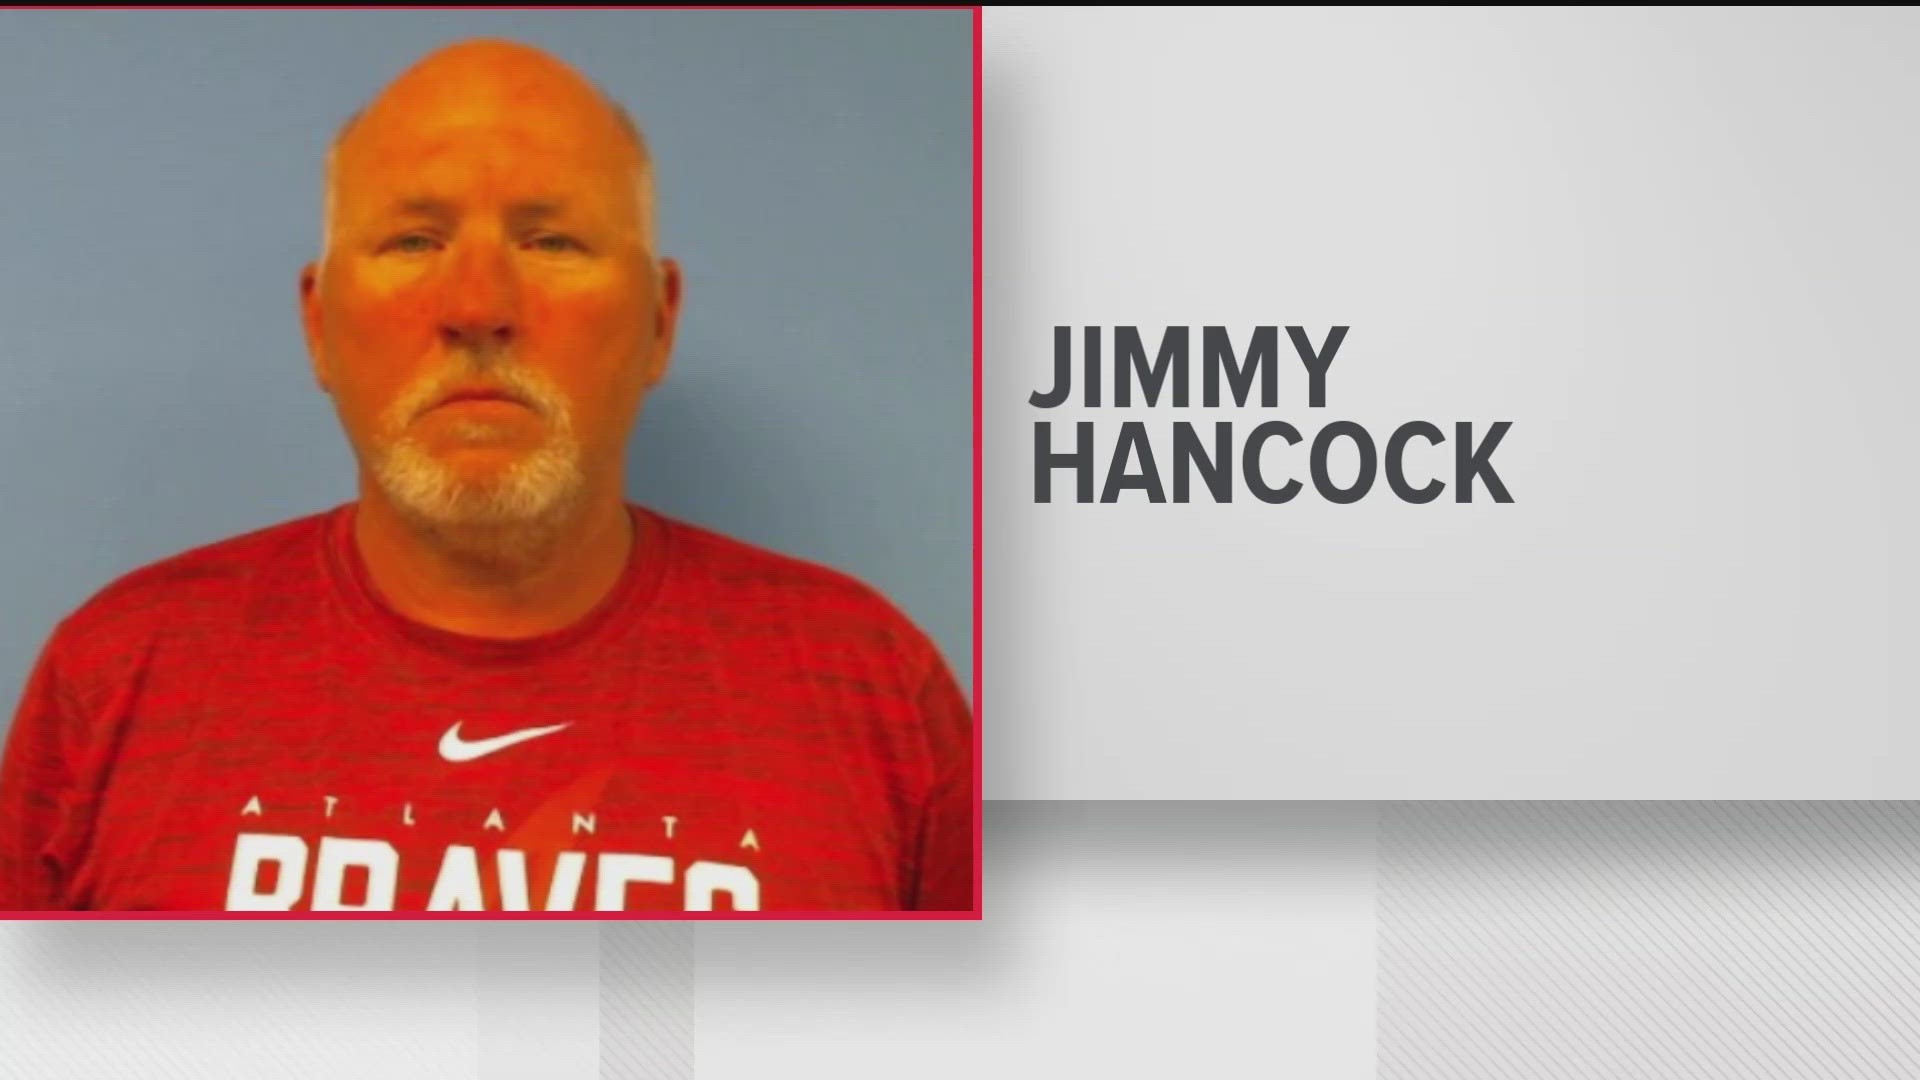 Deputy Jimmy Hancock was taken into custody and charged with operating a watercraft under the influence of alcohol and operating a vessel with improper lights.